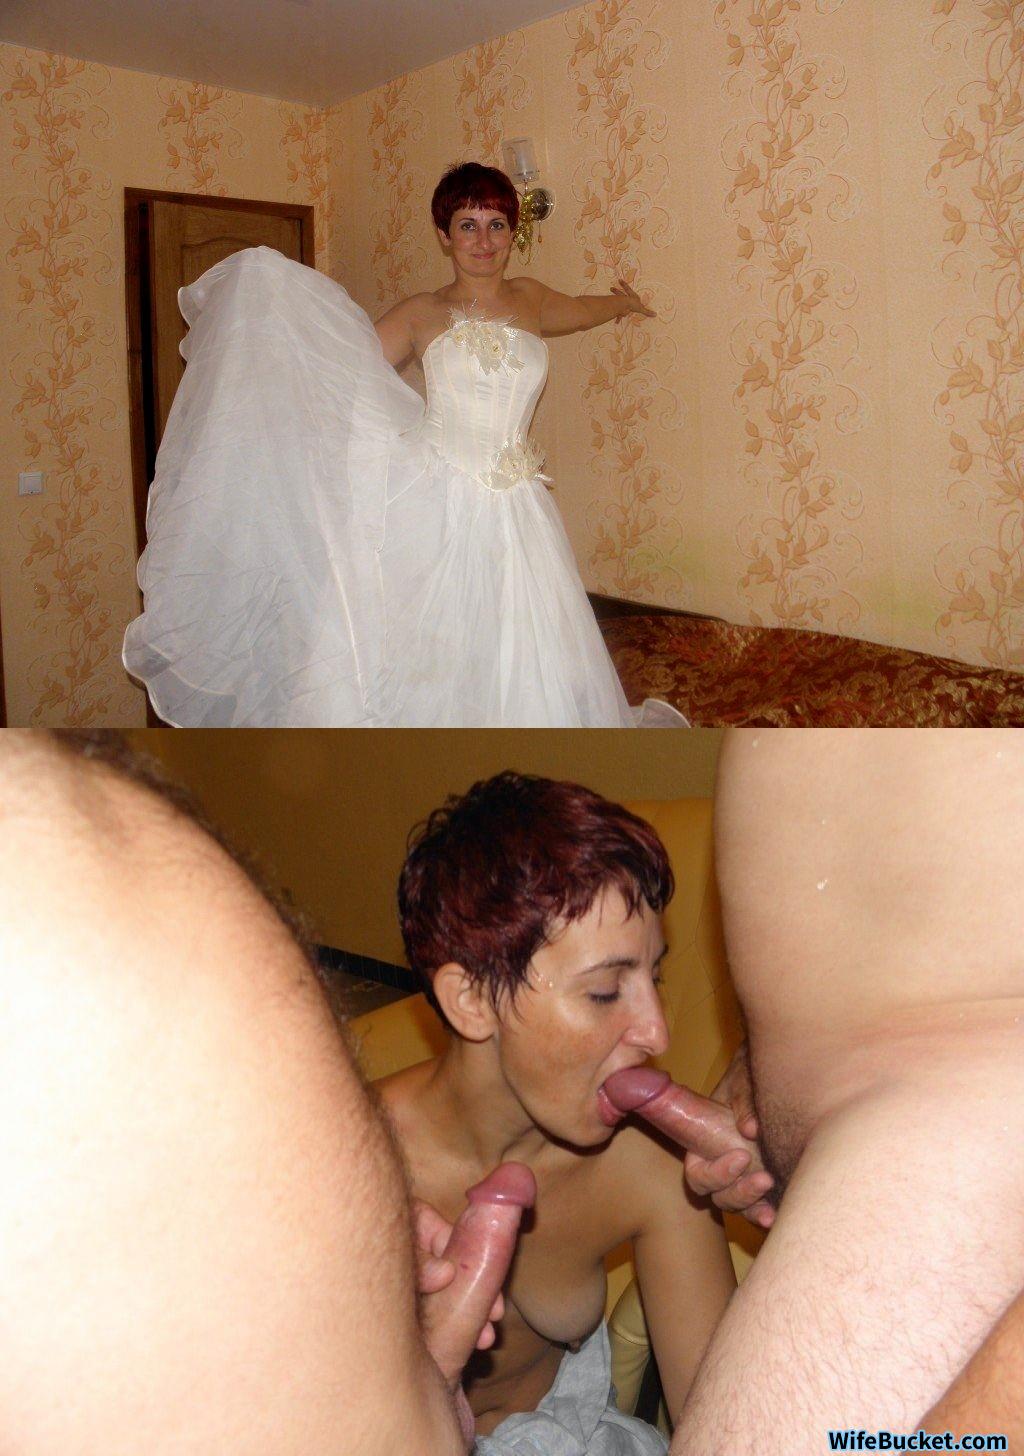 free nude amateur newlywed photos Sex Images Hq